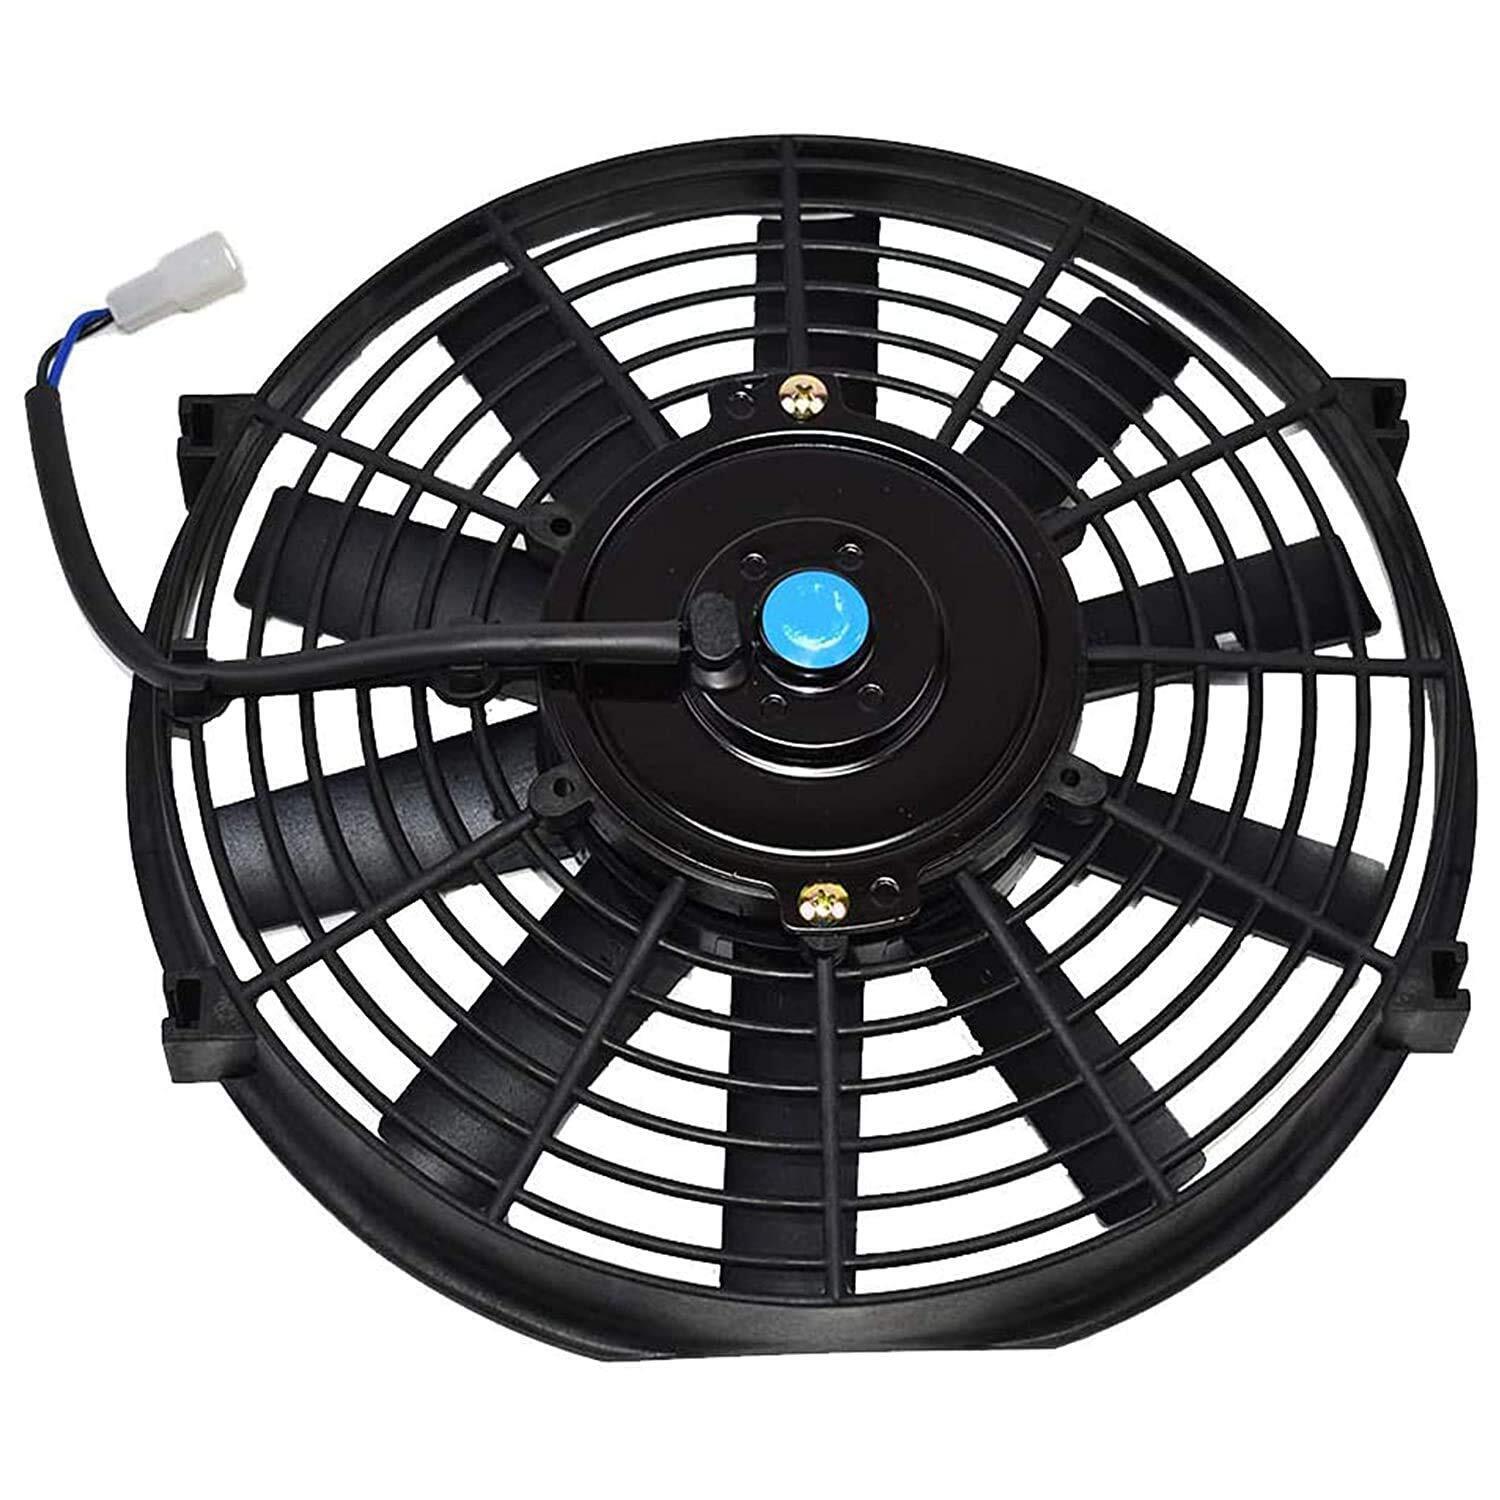 A-team Performance - 150051 Electric Car Radiator Cooling Fan Transmission - Aut